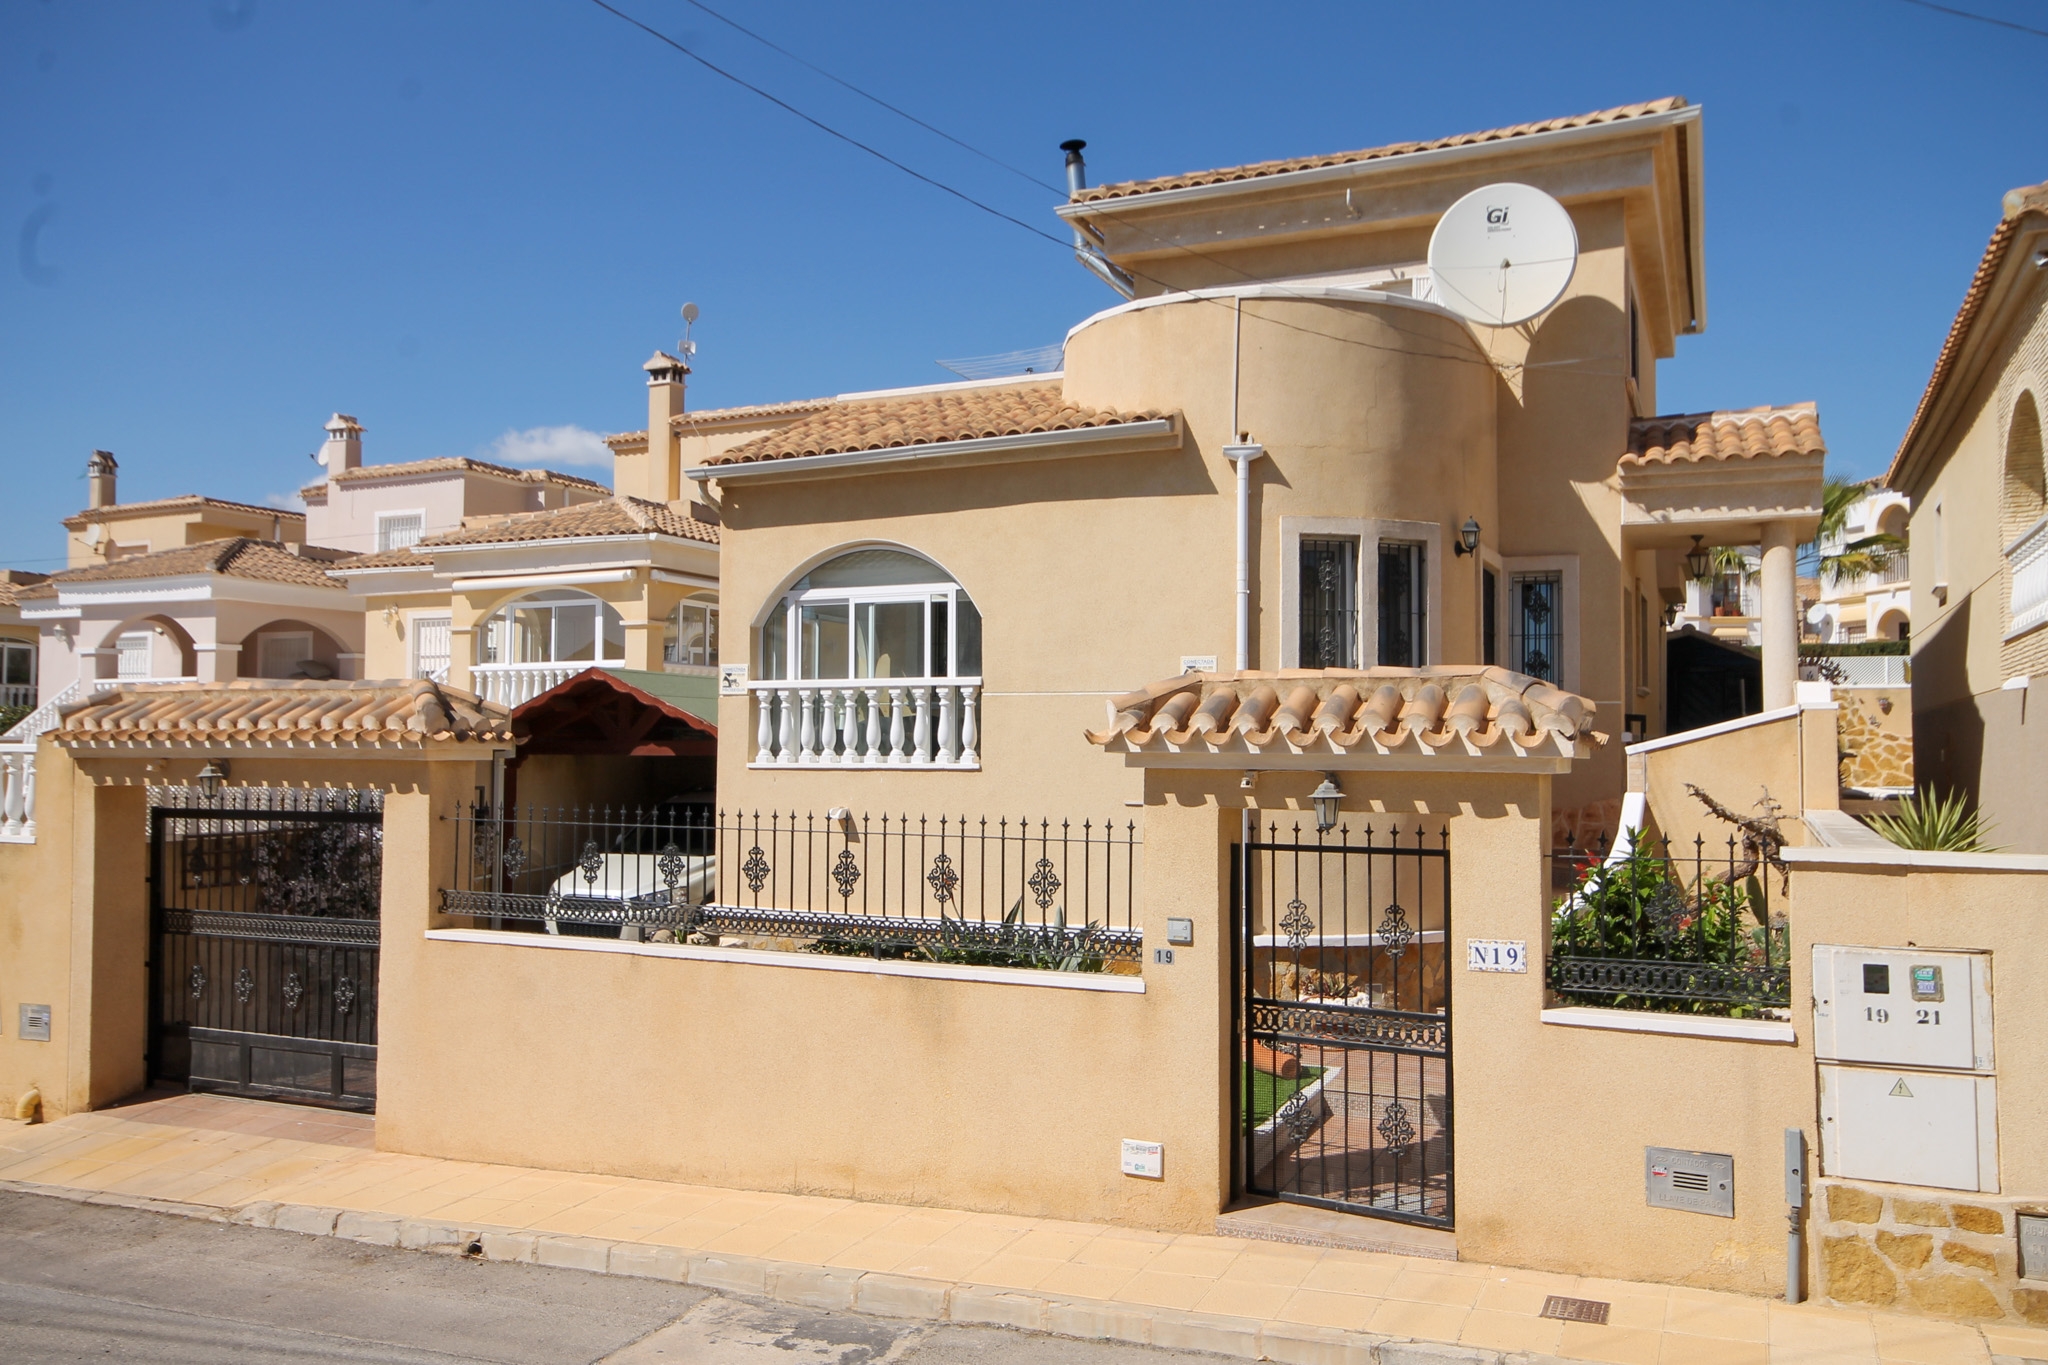 3 Bedroom detached villa with private pool